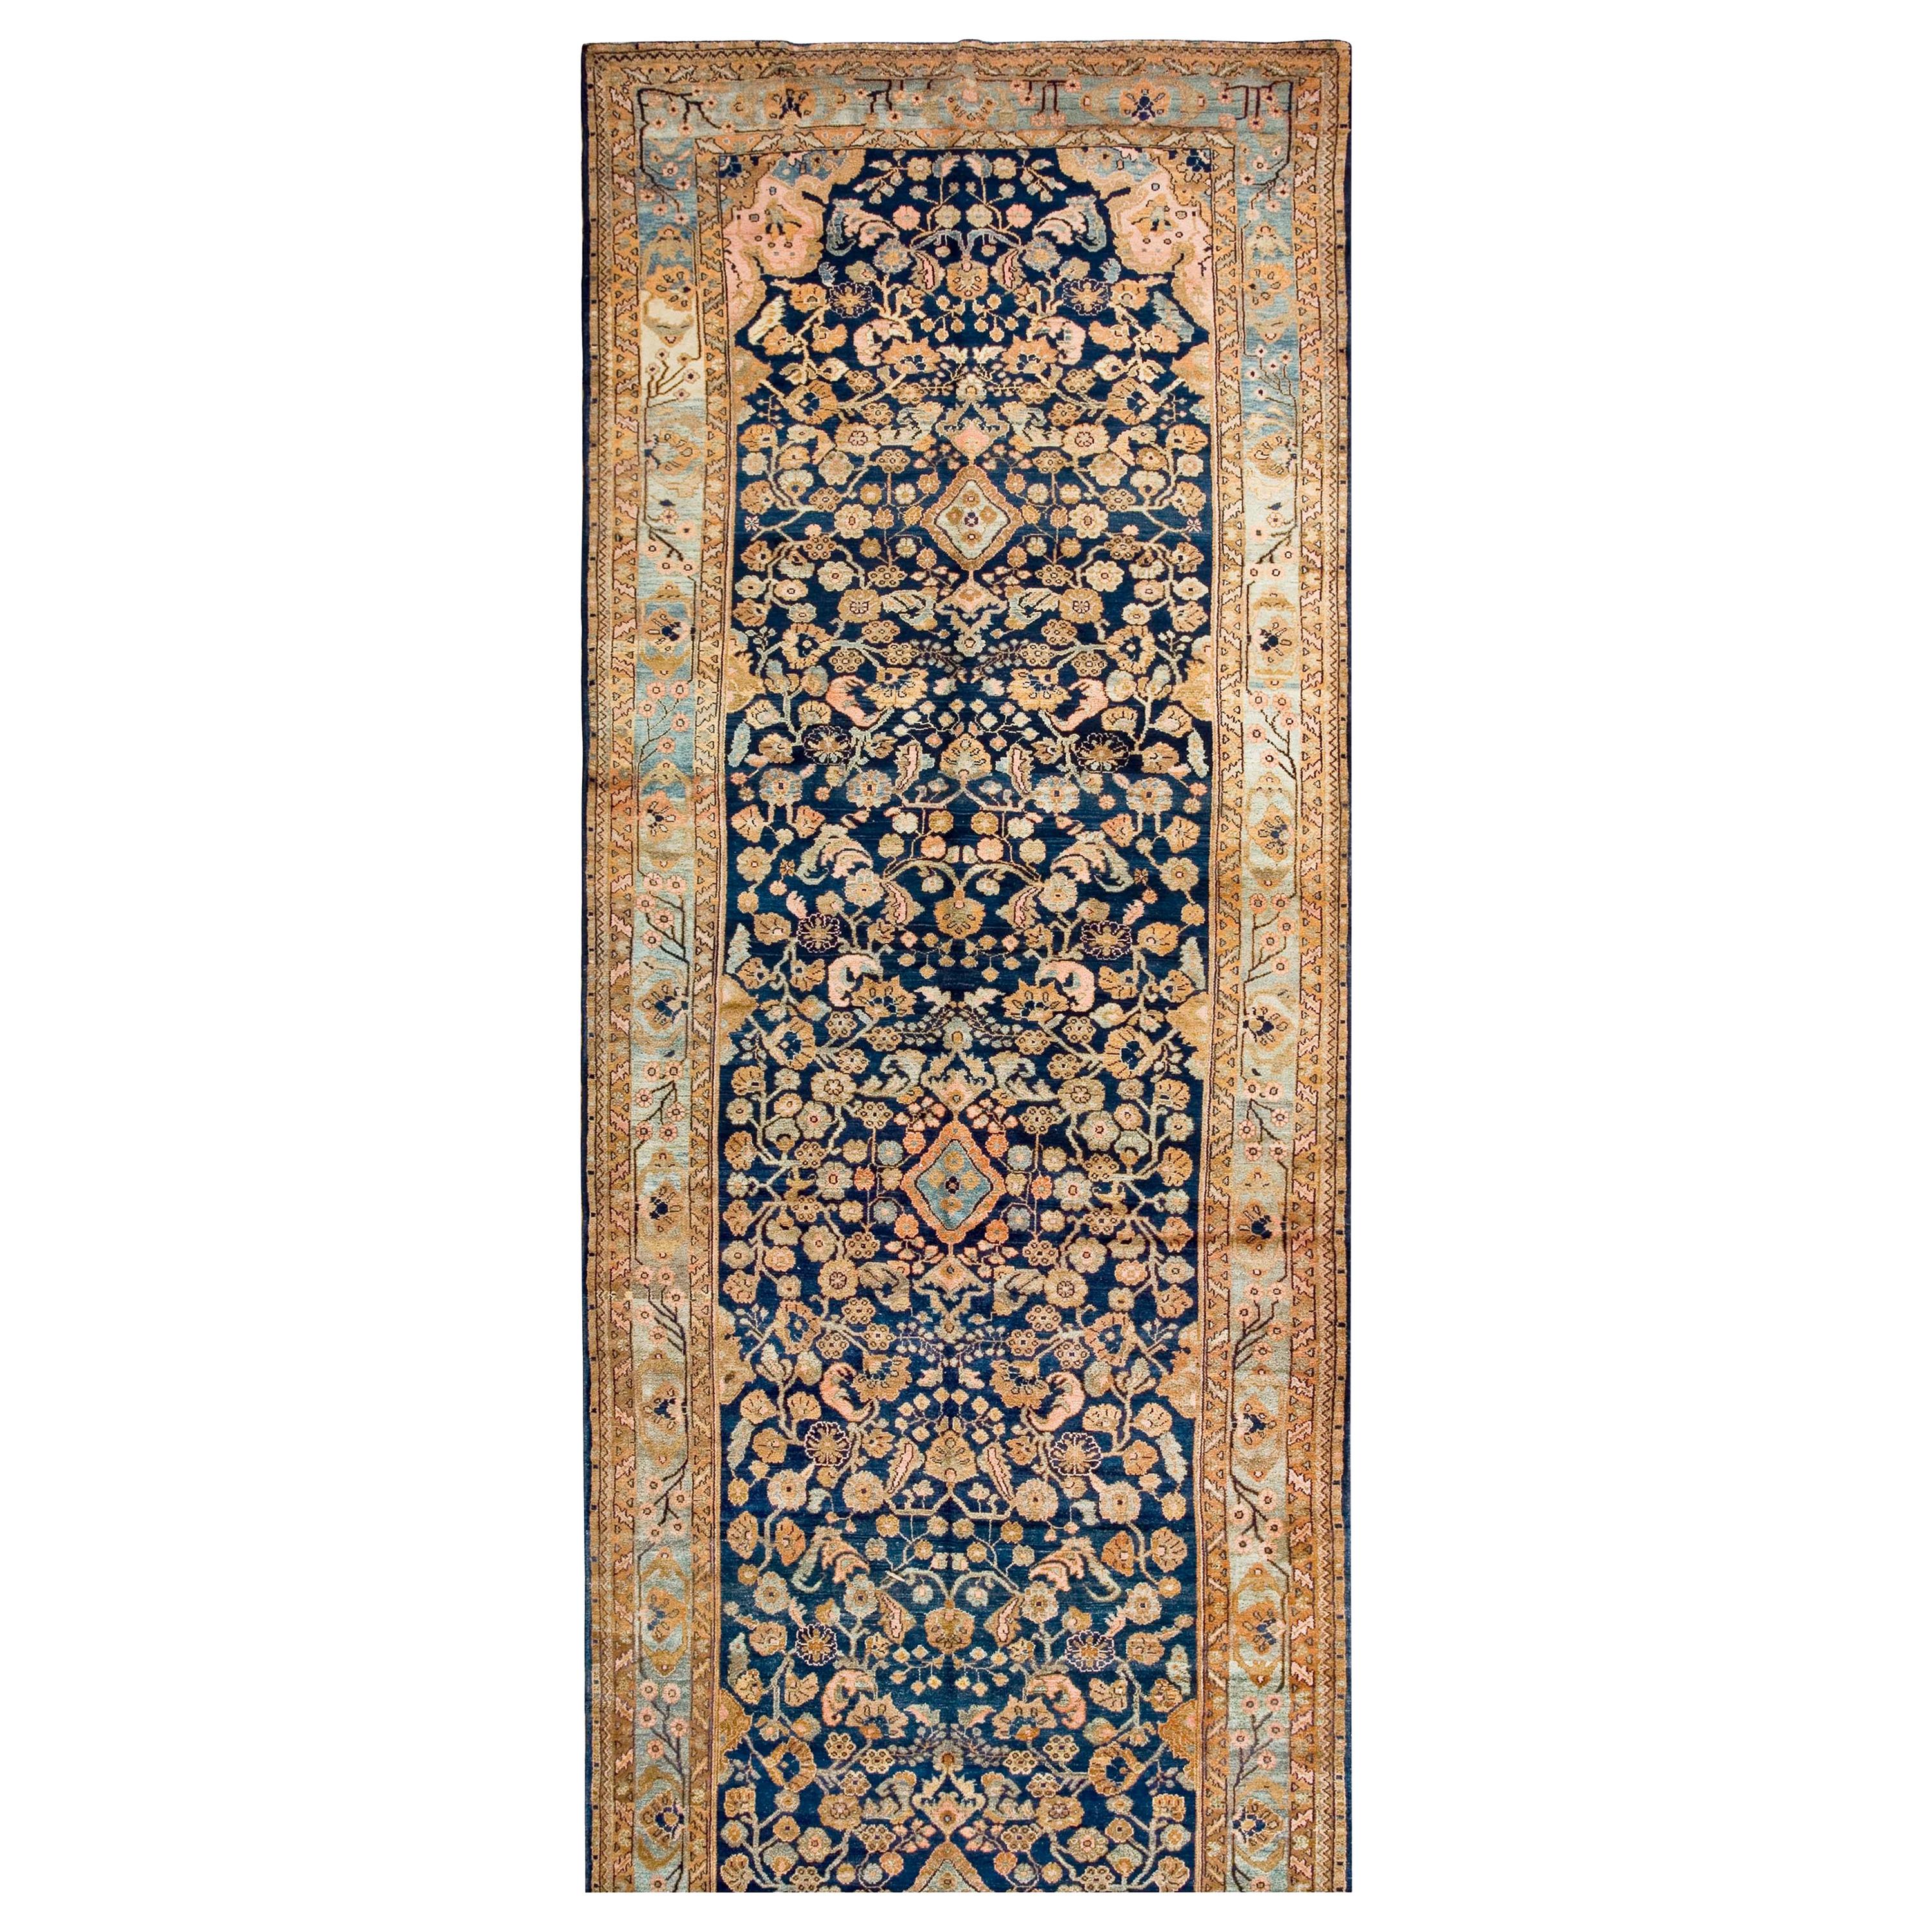 Early 20th Century Persian Malayer Gallery Carpet ( 6'6" x 20'9" - 198 x 632 ) For Sale